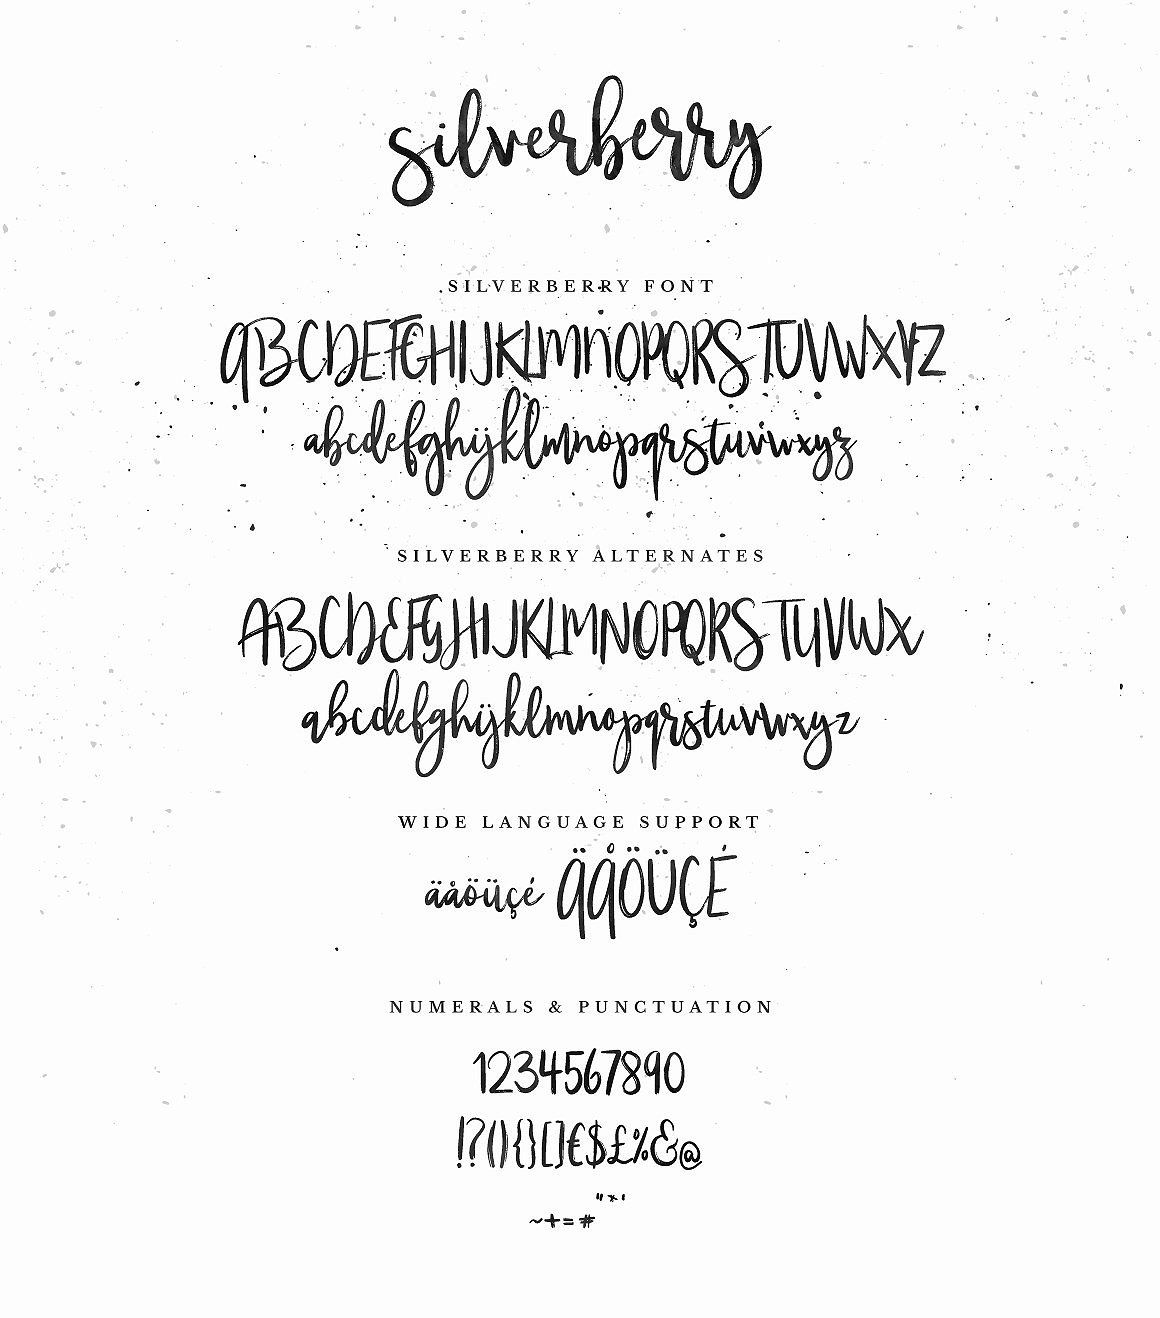 Silverberry Dry Ink Font By Worn Out Media Thehungryjpeg Com